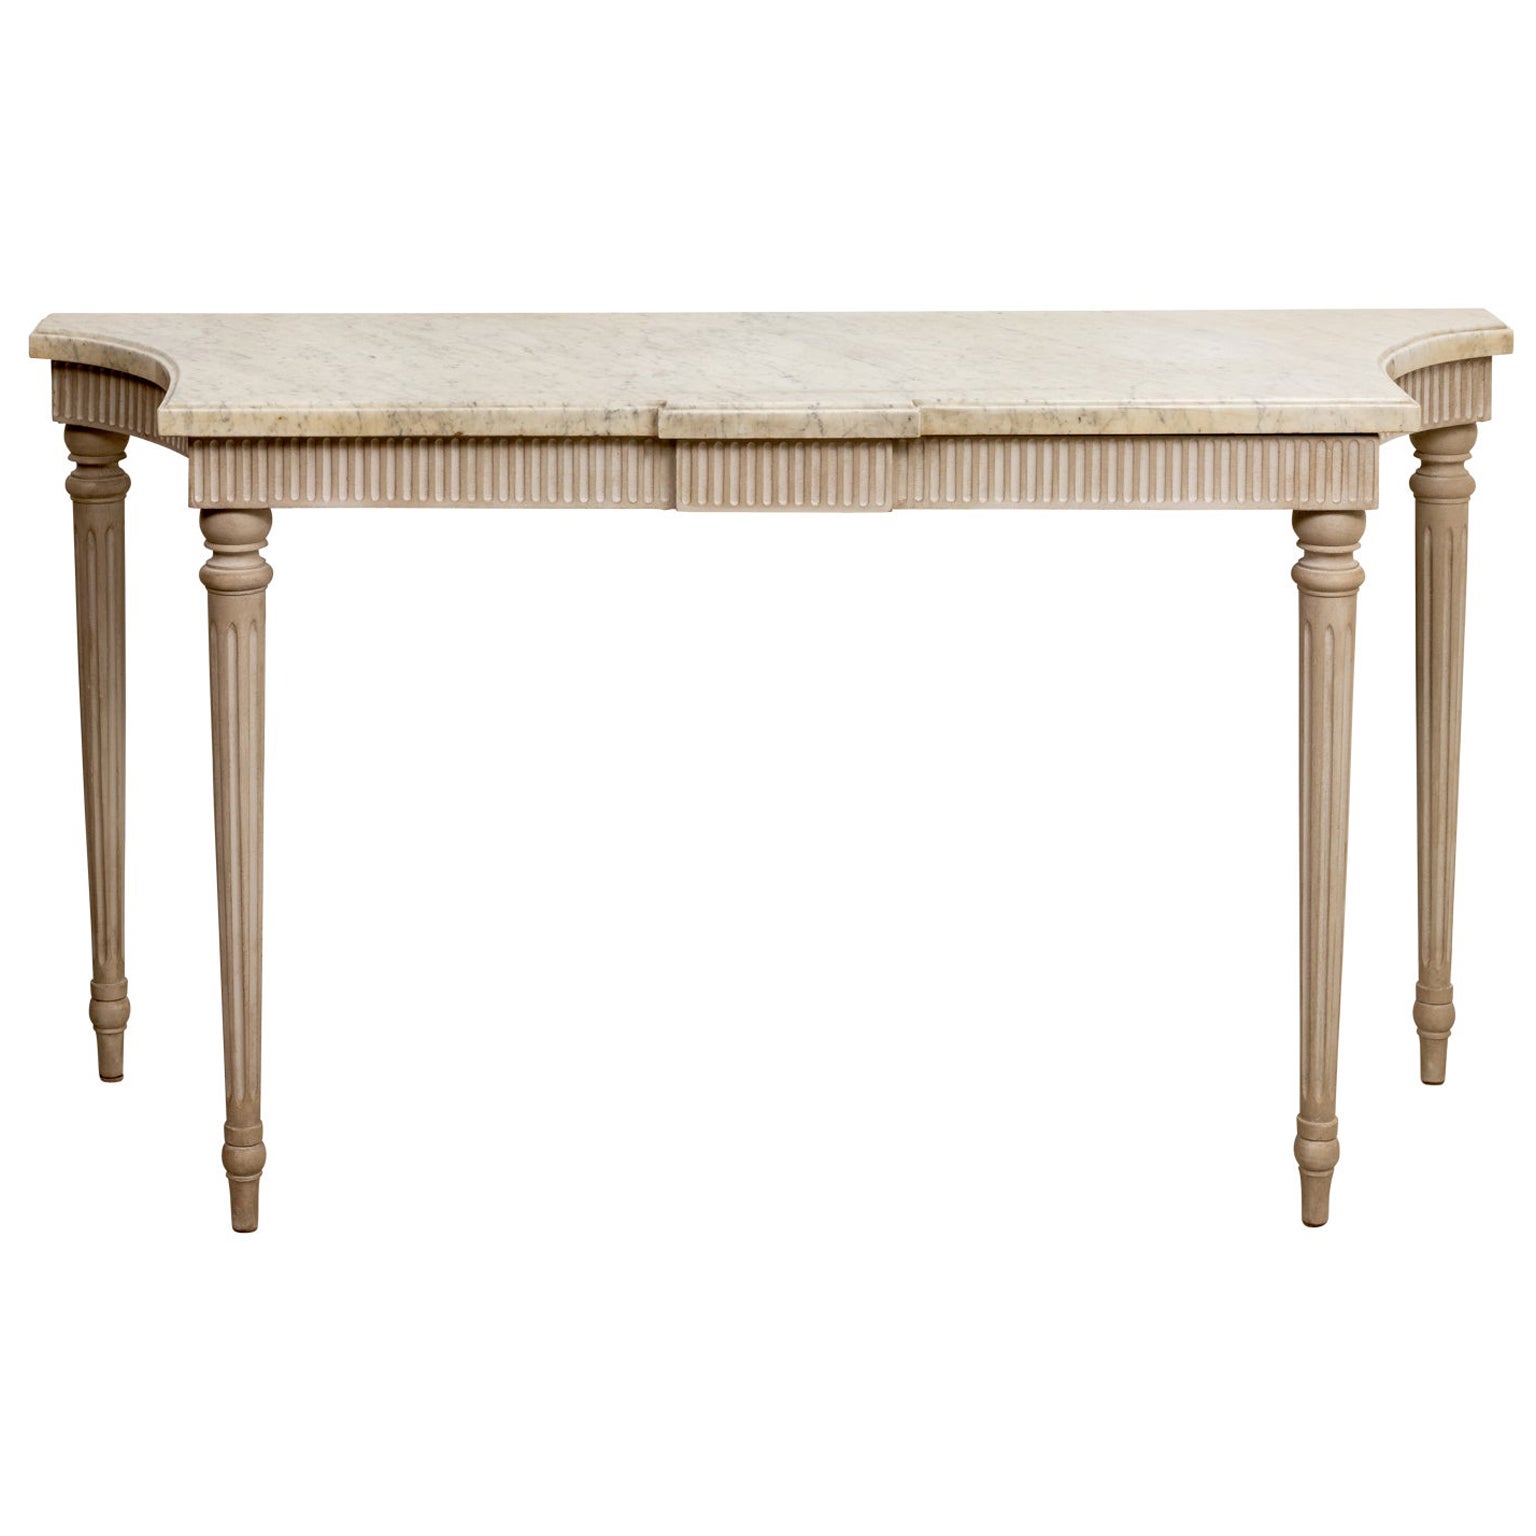 Neoclassical Painted Console with Marble Top